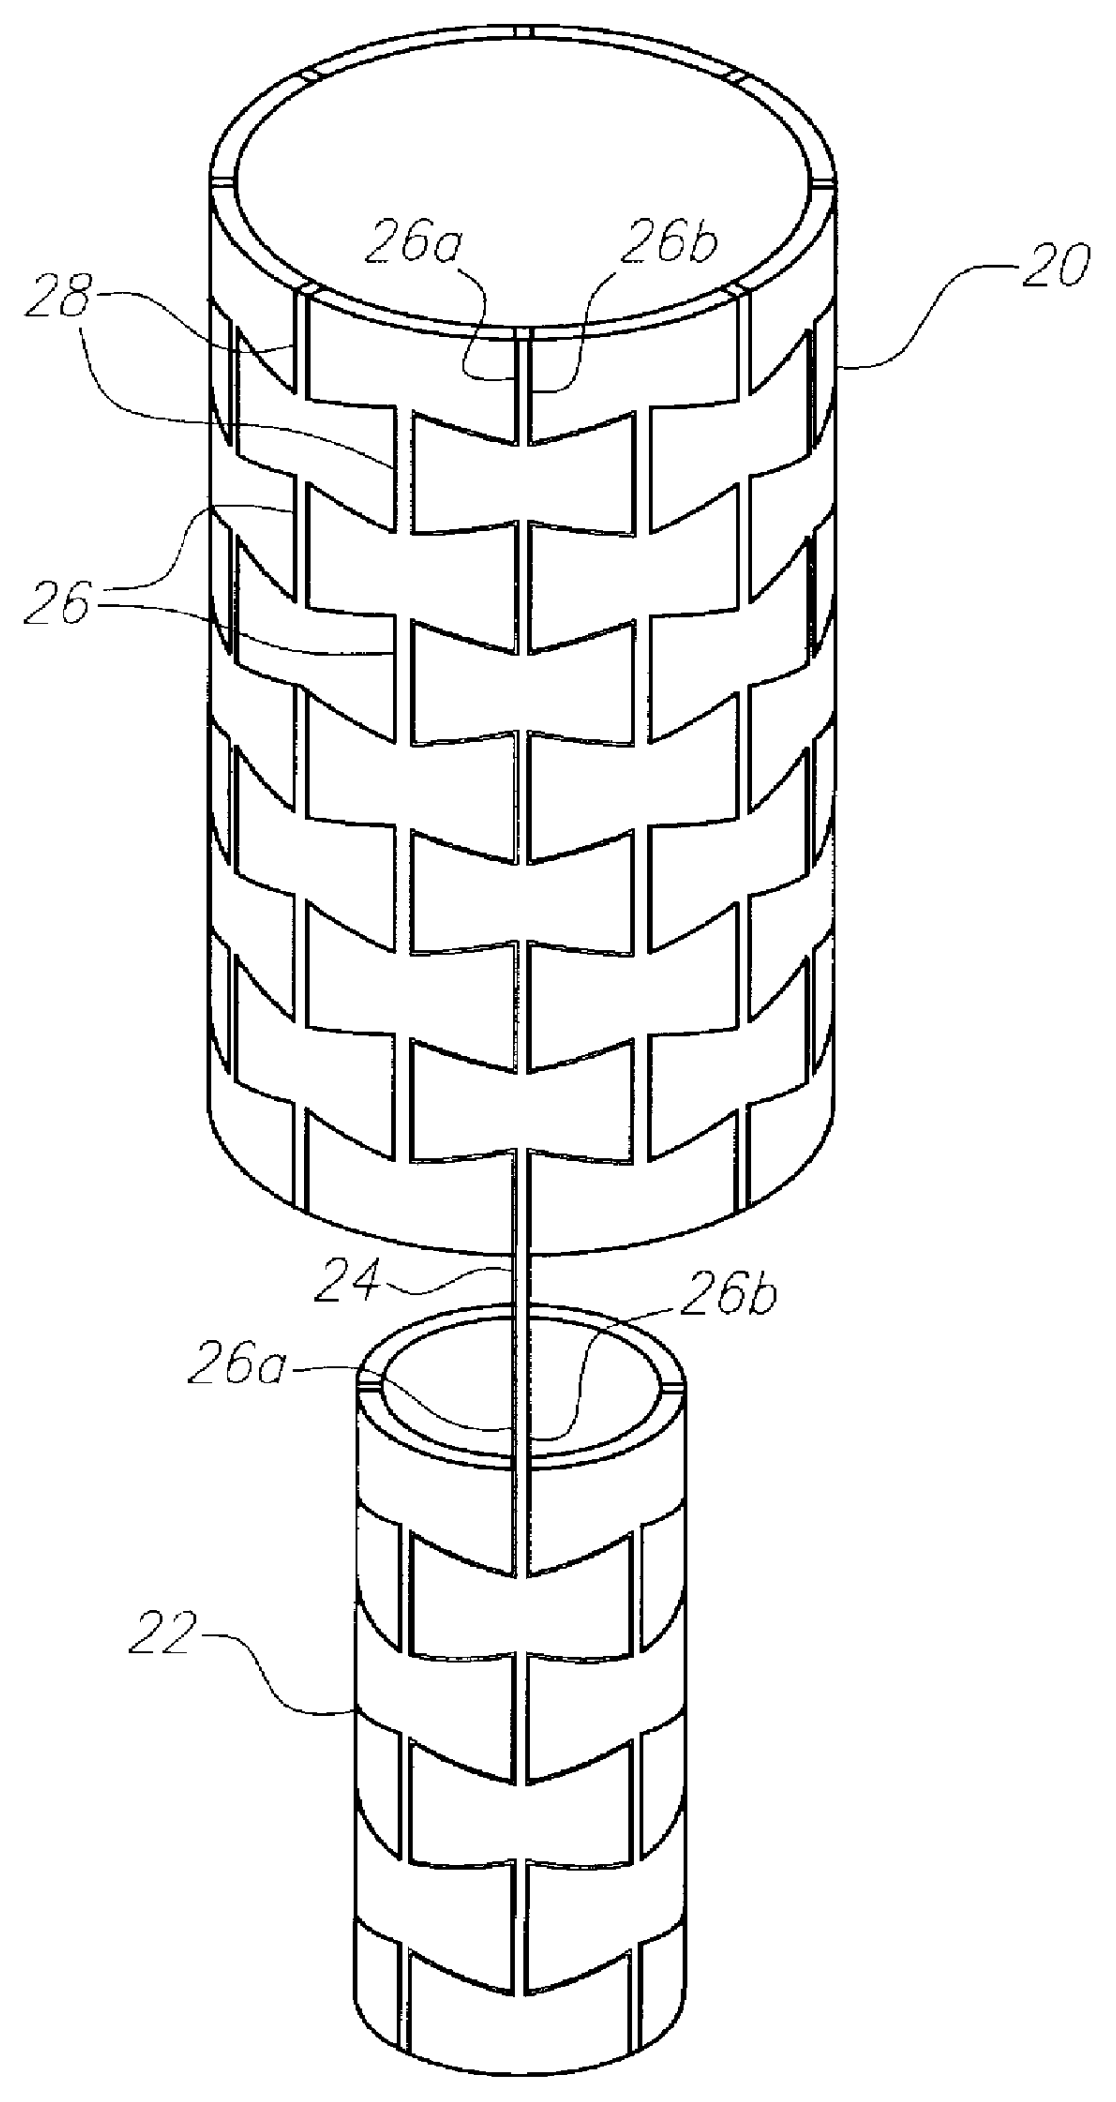 Stent or graft support structure for treating bifurcated vessels having different diameter portions and methods of use and implantation